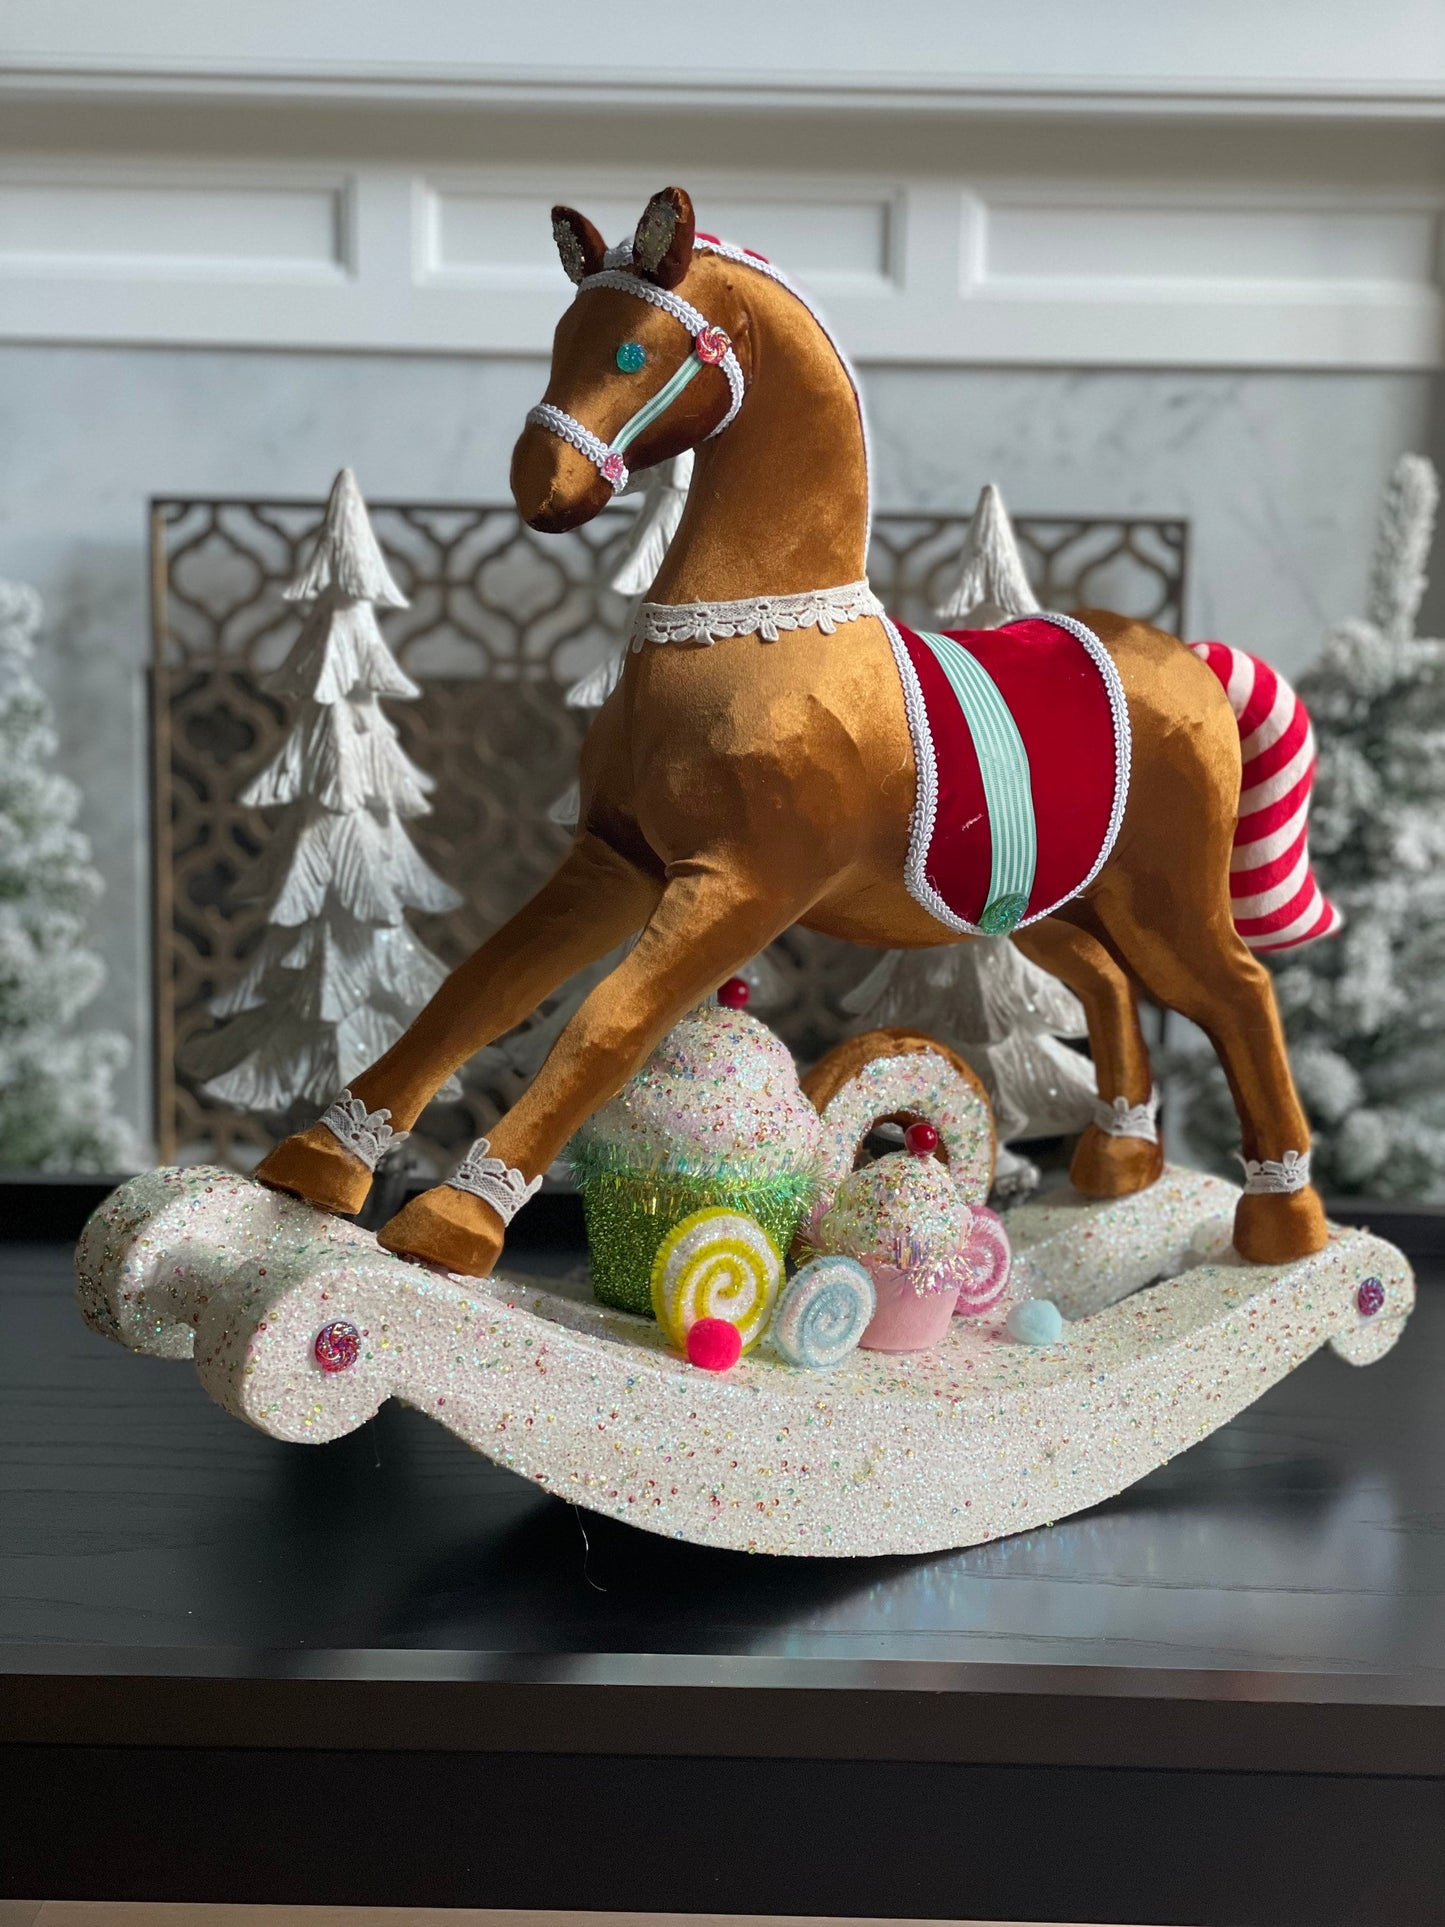 23”Hx 27” W. Rocking horse with cupcakes and donuts. One rocking horse.